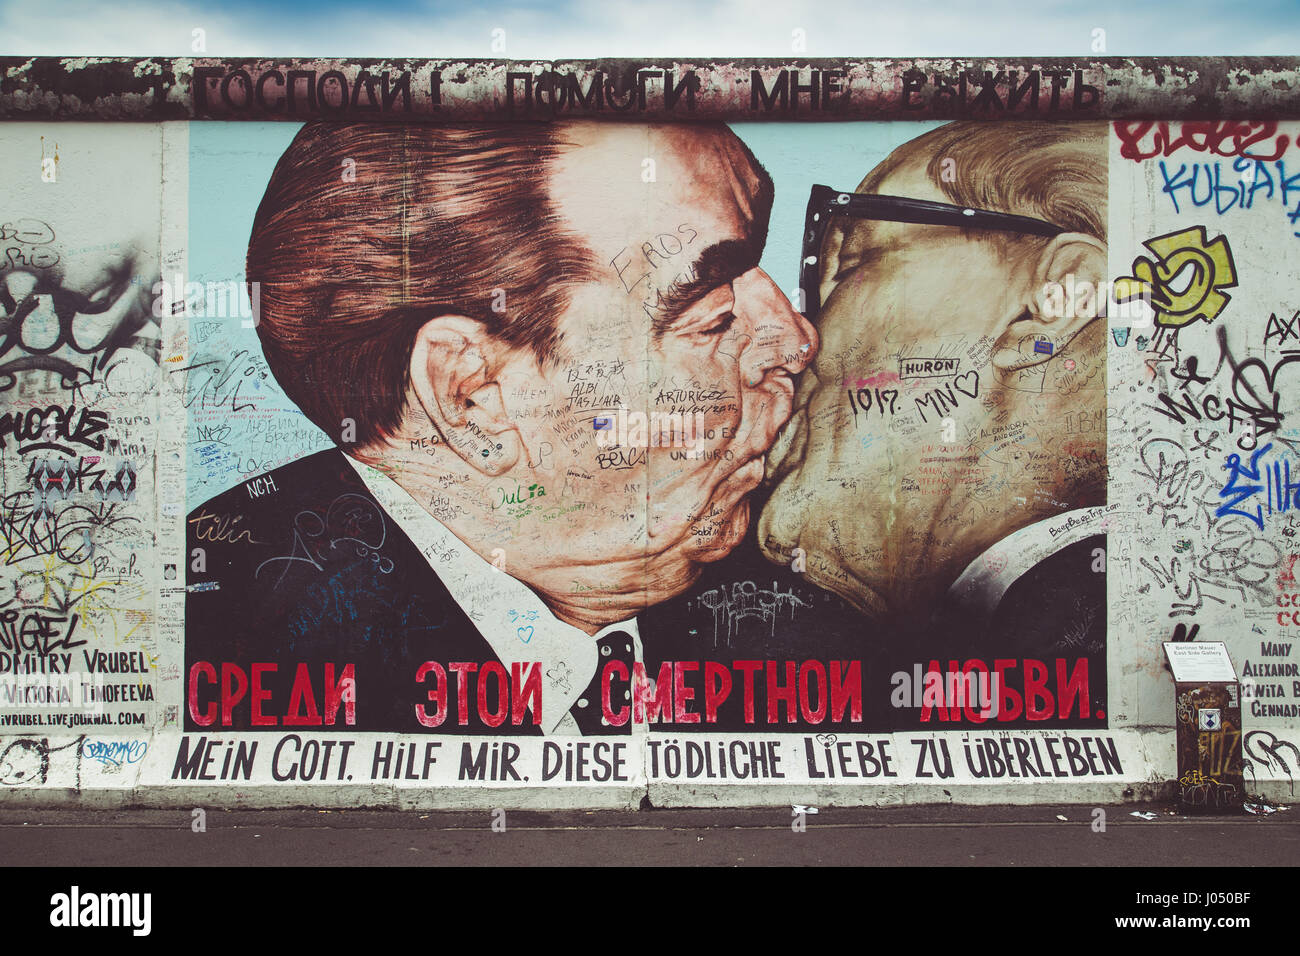 Street art graffiti painting 'The Kiss' by Dmitri Vrubel at famous East Side Gallery, the longest preserved section of Berlin Wall in central Berlin Stock Photo